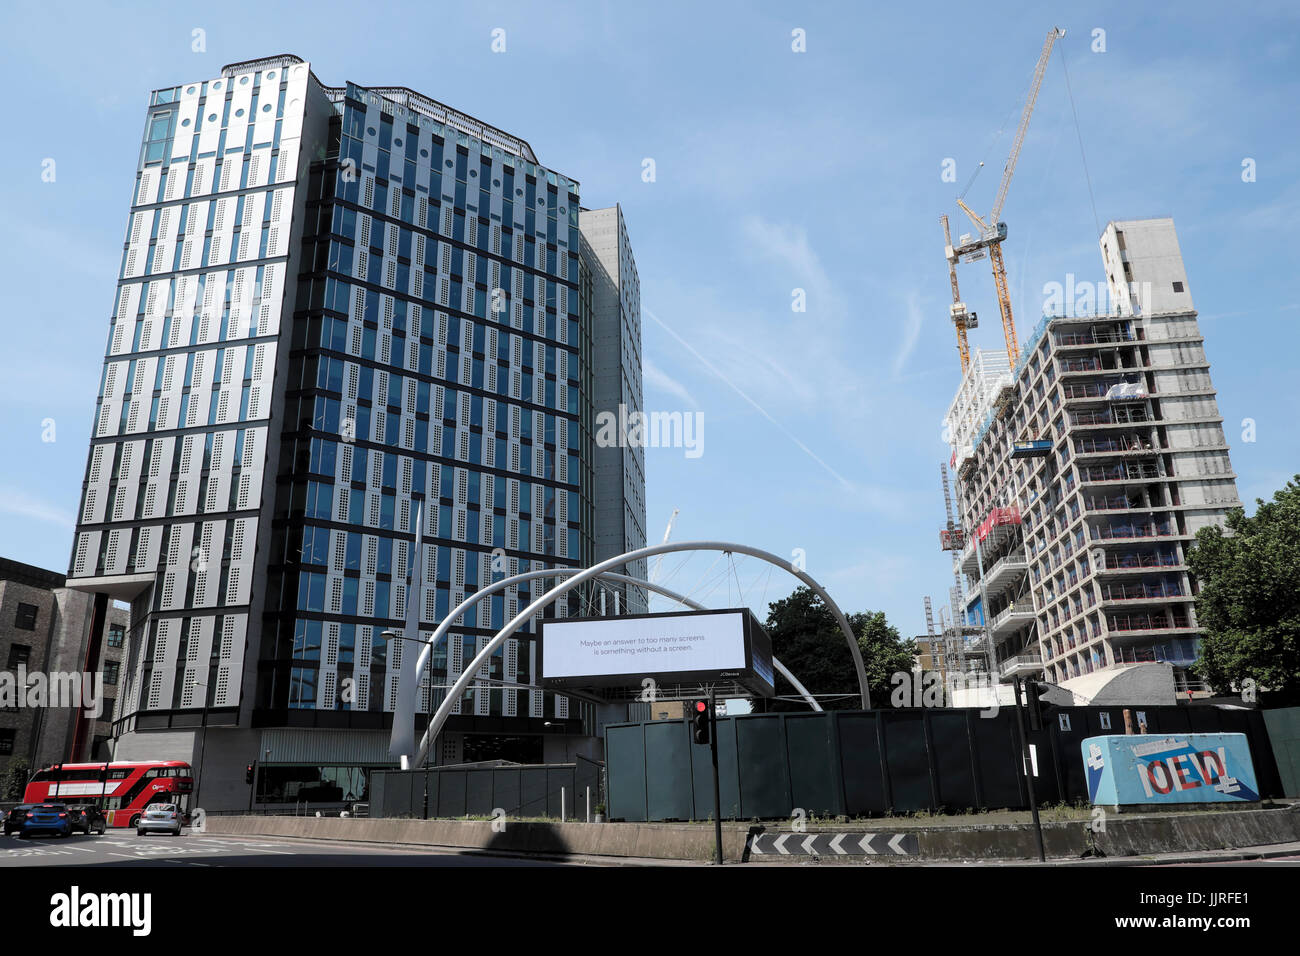 White Collar Factory and The Bower new office buildings designed by AHMM at Old Street Roundabout in Shoreditch East London EC1Y UK  KATHY DEWITT Stock Photo